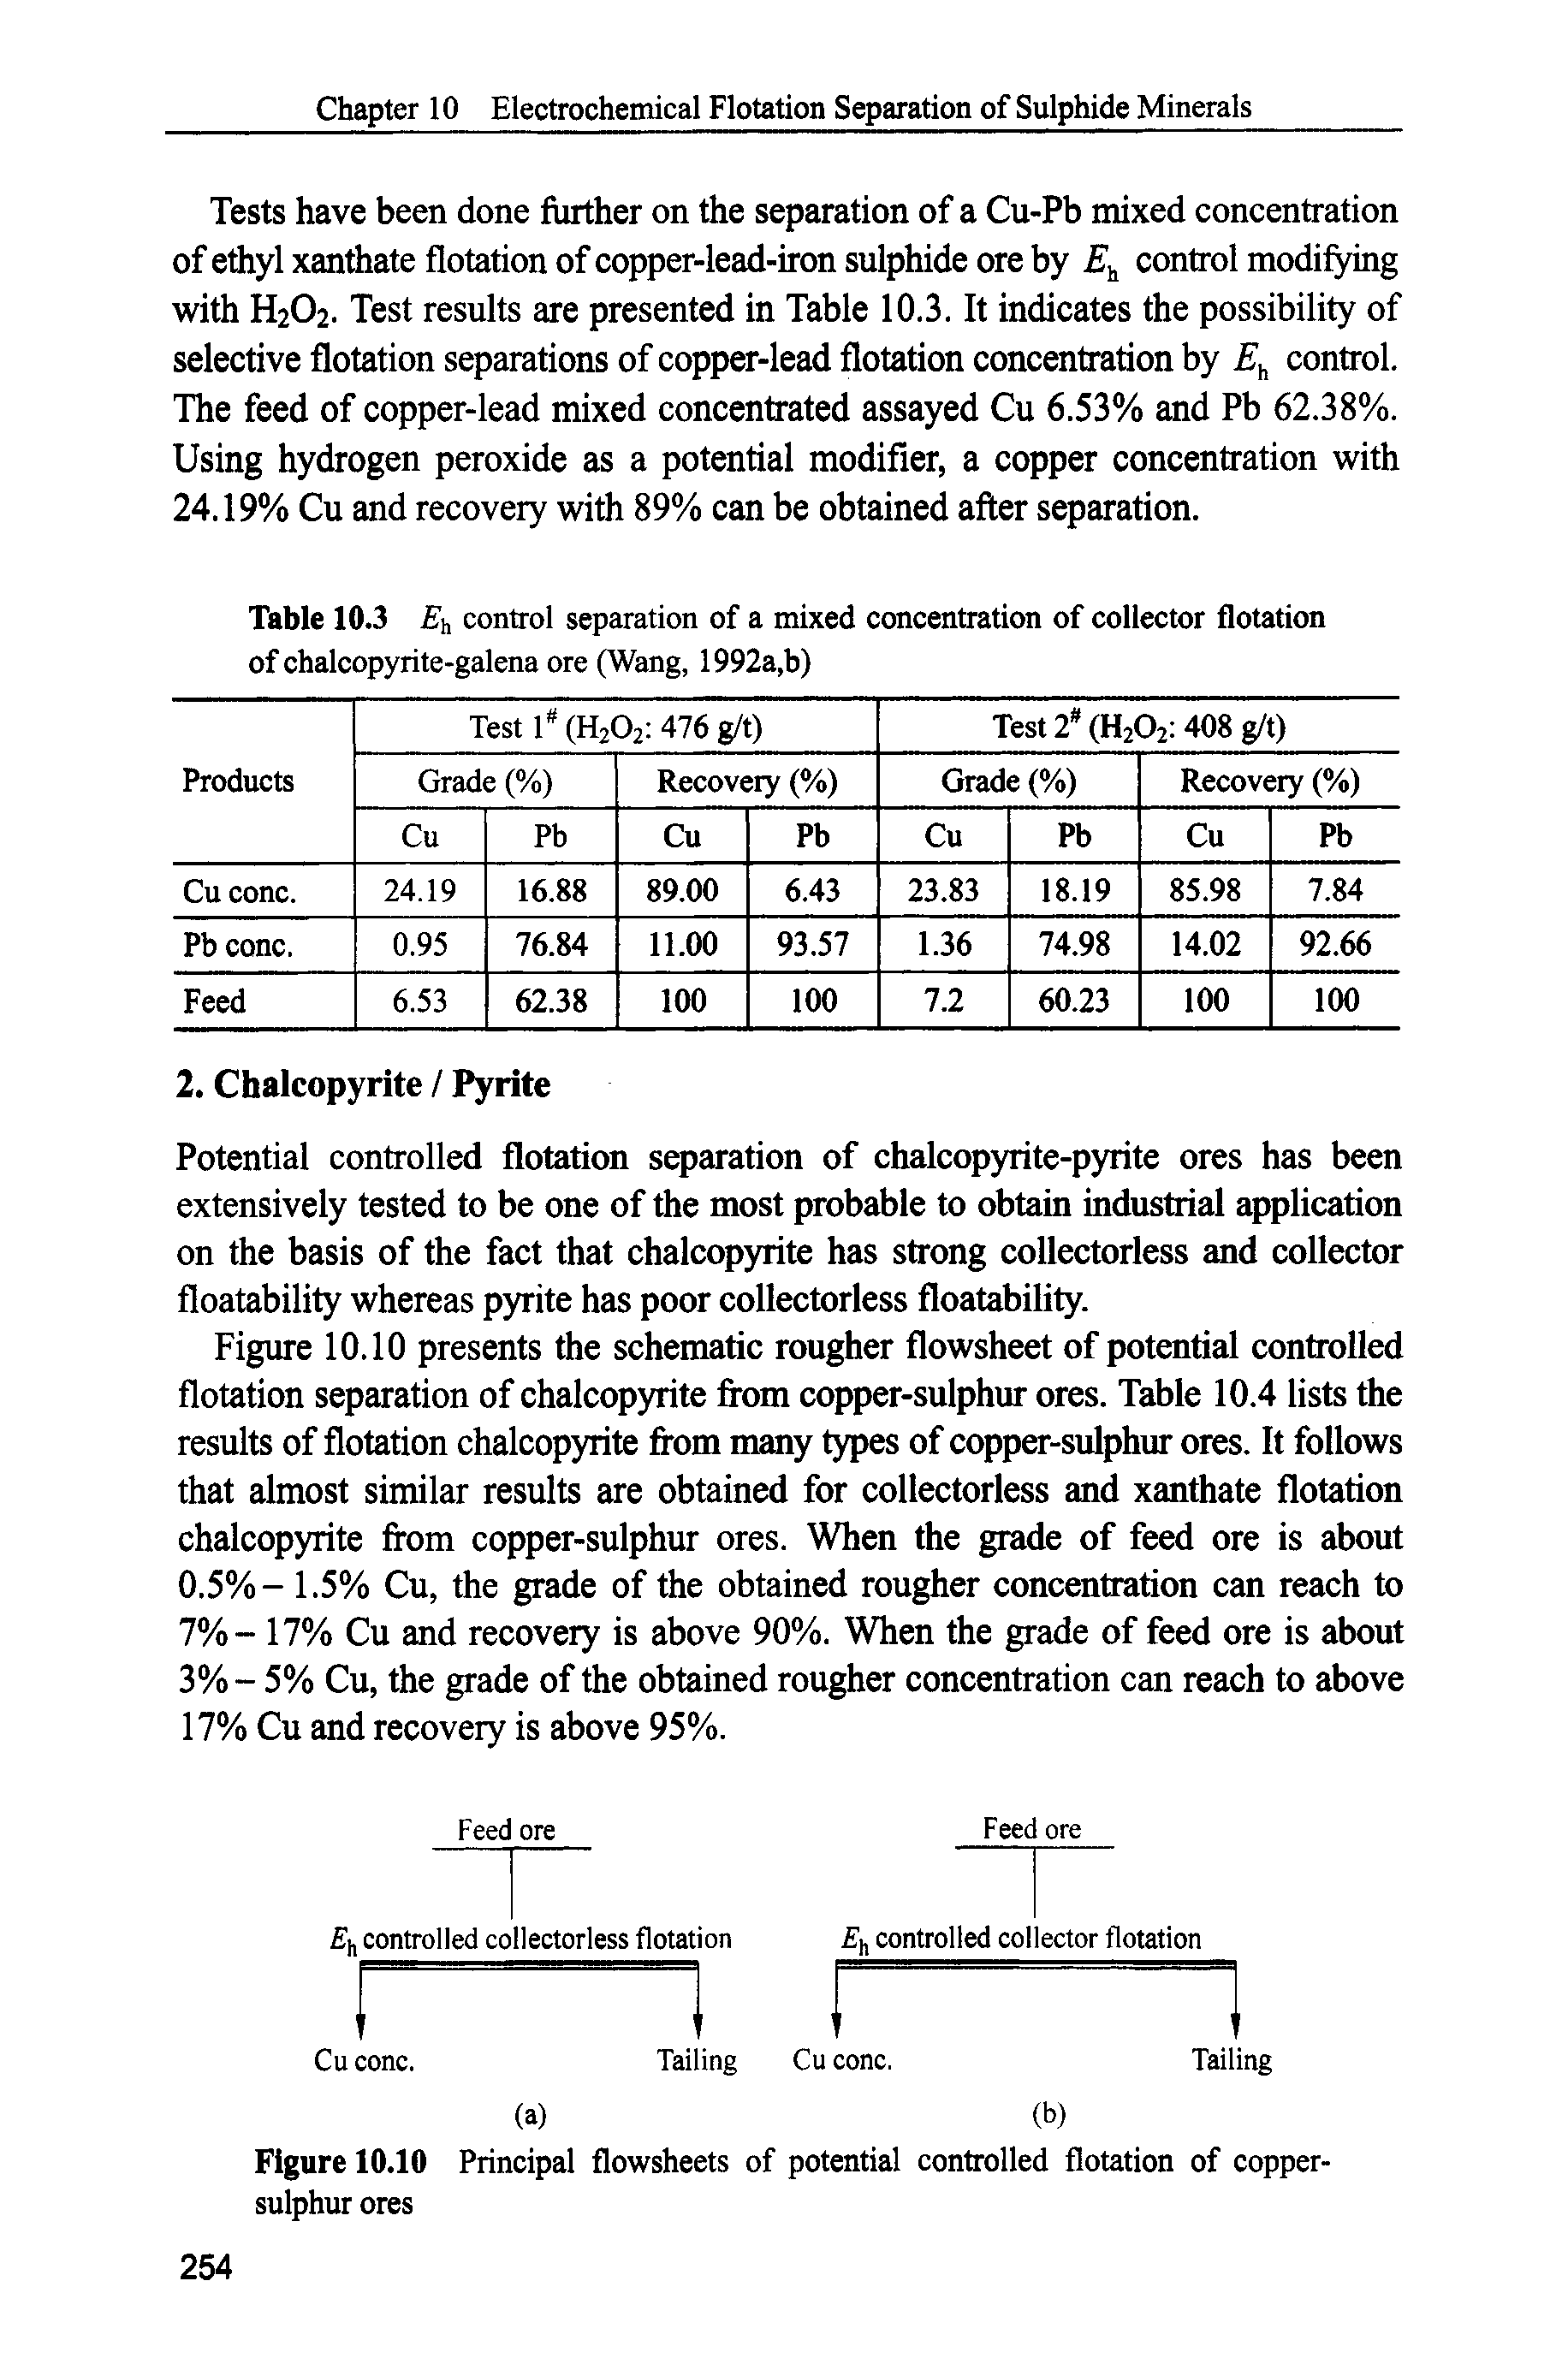 Table 10.3 Eh control separation of a mixed concentration of collector flotation of chalcopyrite-galena ore (Wang, 1992a,b)...